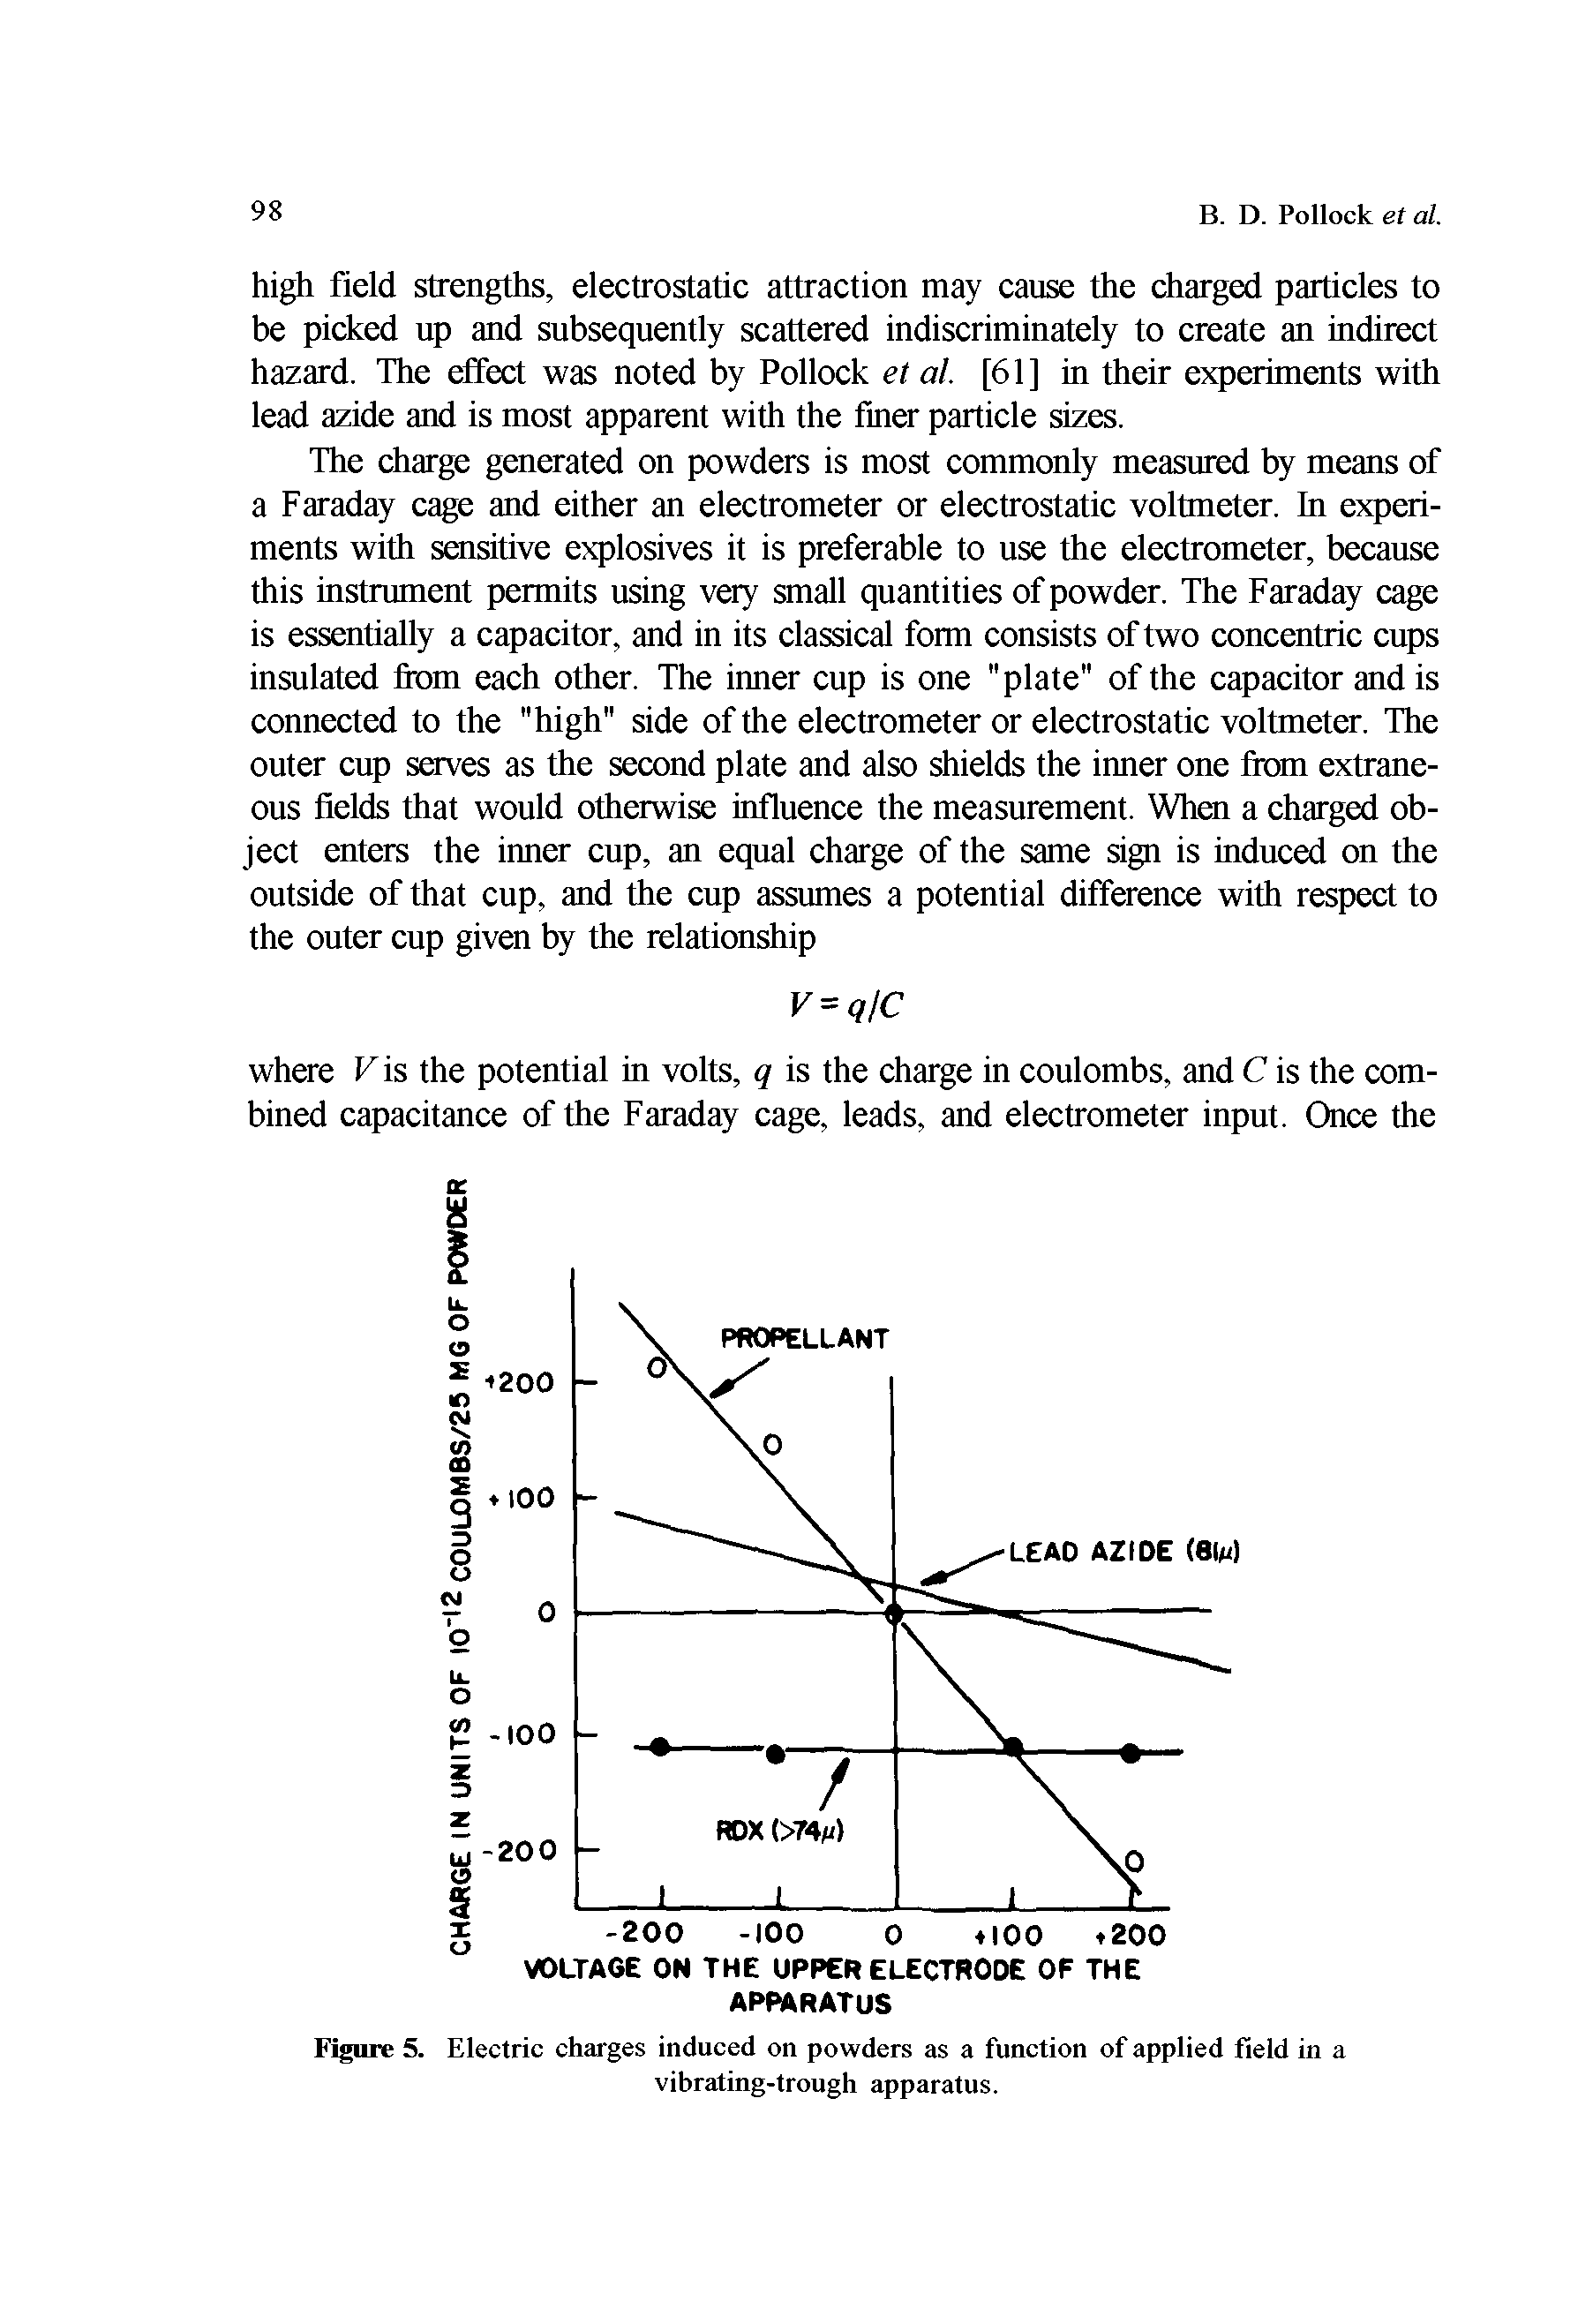 Figure 5. Electric charges induced on powders as a function of applied field in a vibrating-trough apparatus.